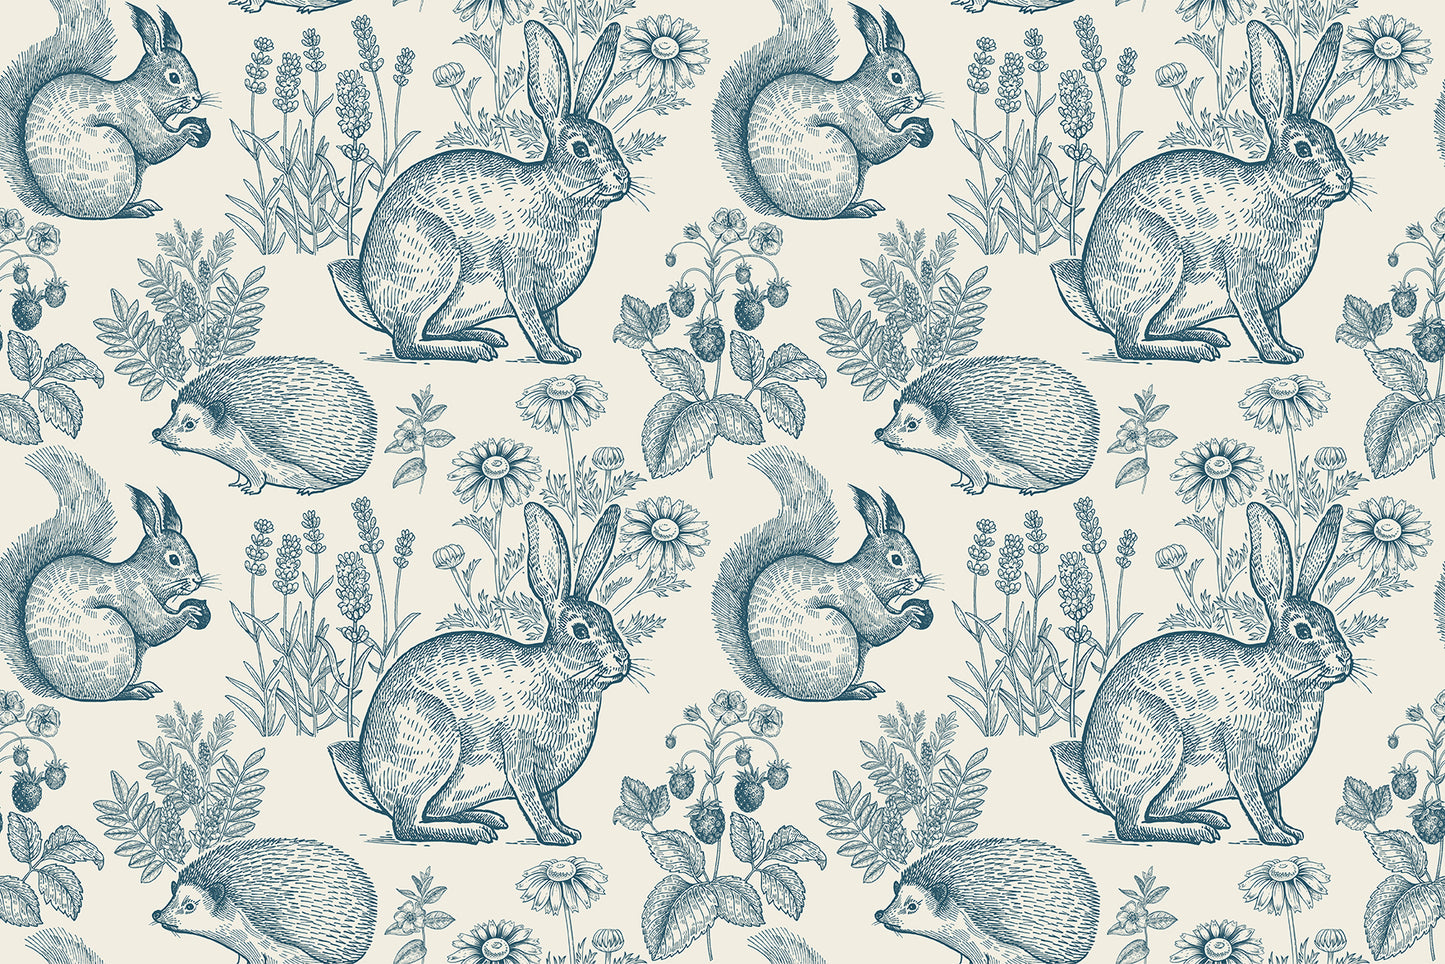 Chubby Bunnies Peel And Stick Removable Wallpaper